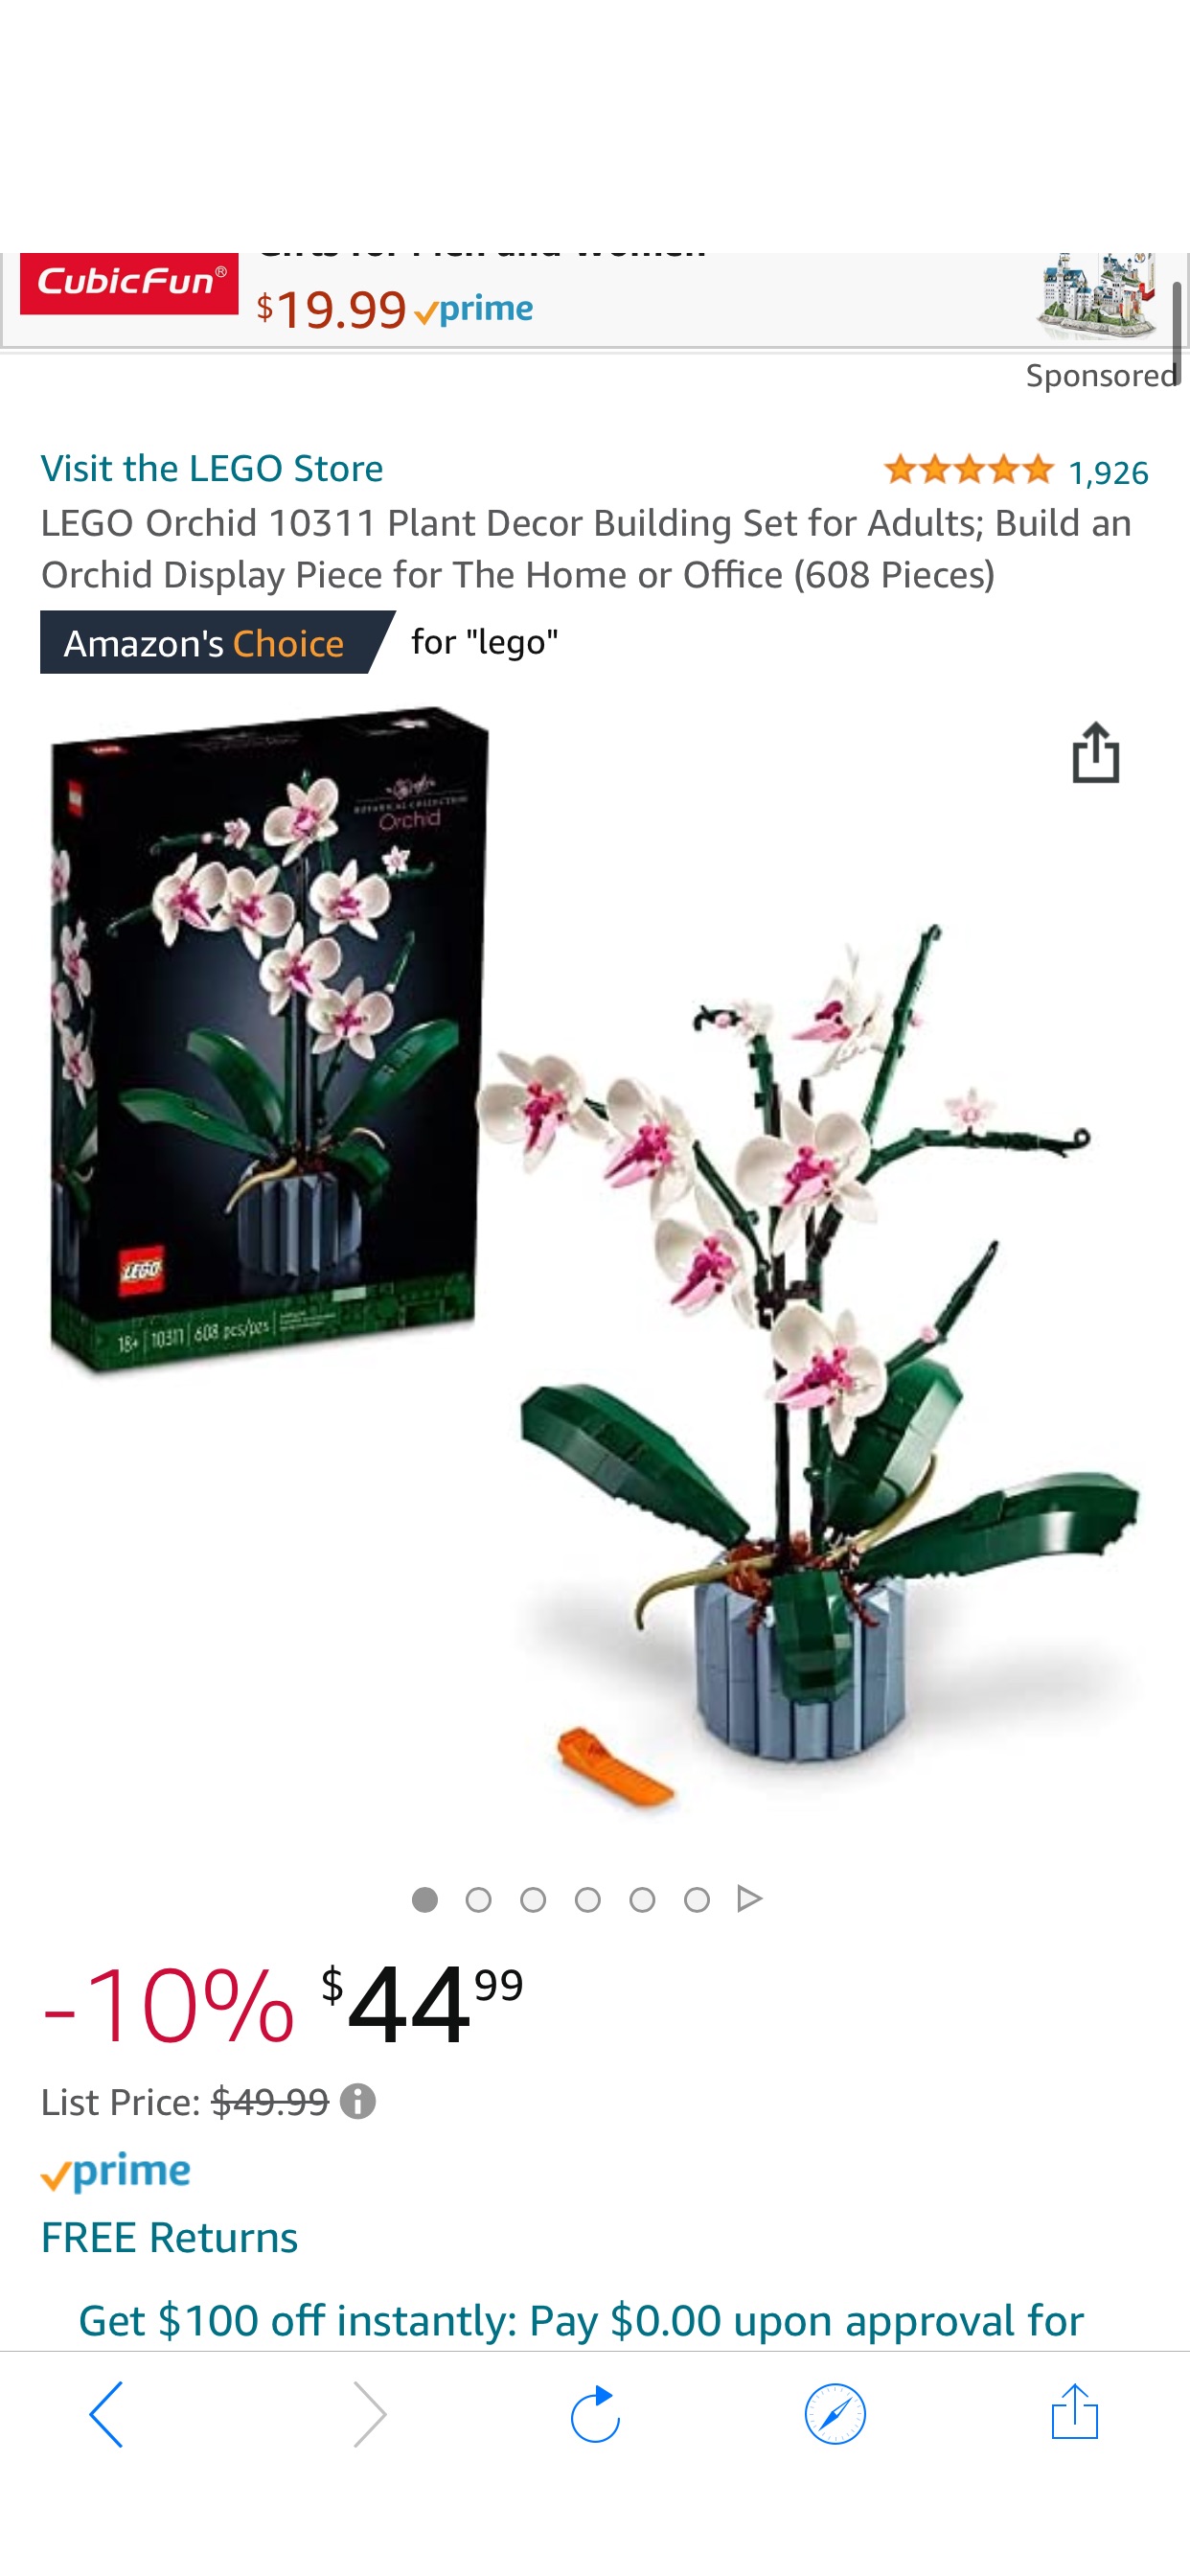 Amazon.com: LEGO Orchid 10311 Plant Decor Building Set for Adults; Build an Orchid Display Piece for The Home or Office (608 Pieces) : Toys & Games 乐高兰花